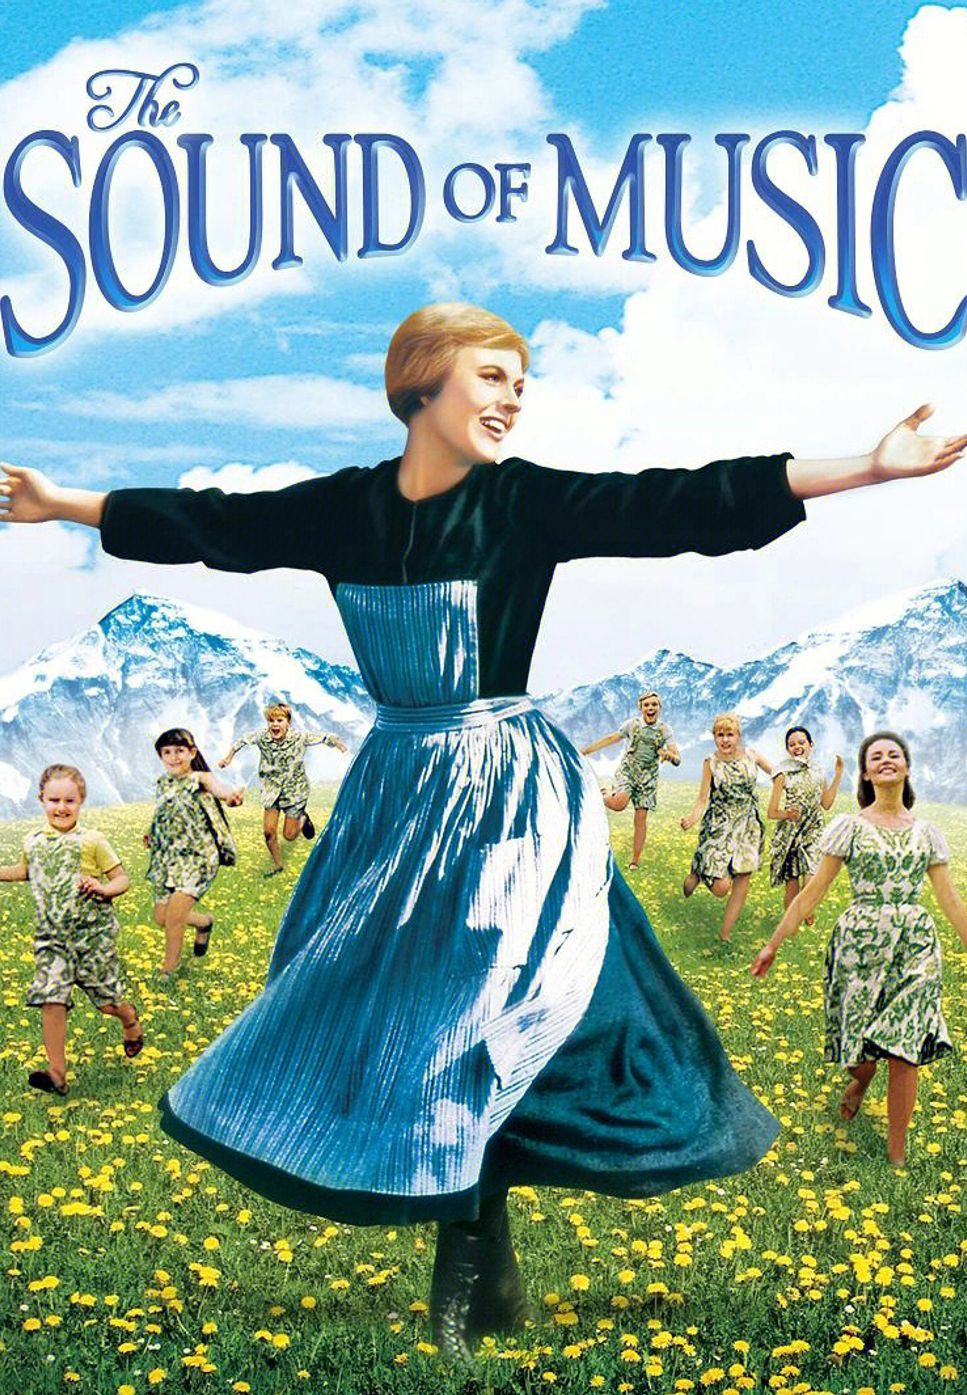 Oscar Hammerstein Ii, Richard Rodgers - The Sound of Music Medley (《音乐之声》混合组曲,For Easy Piano Solo (The Sound of Music, My Favorite Things, Do-Re-Mi)) by poon